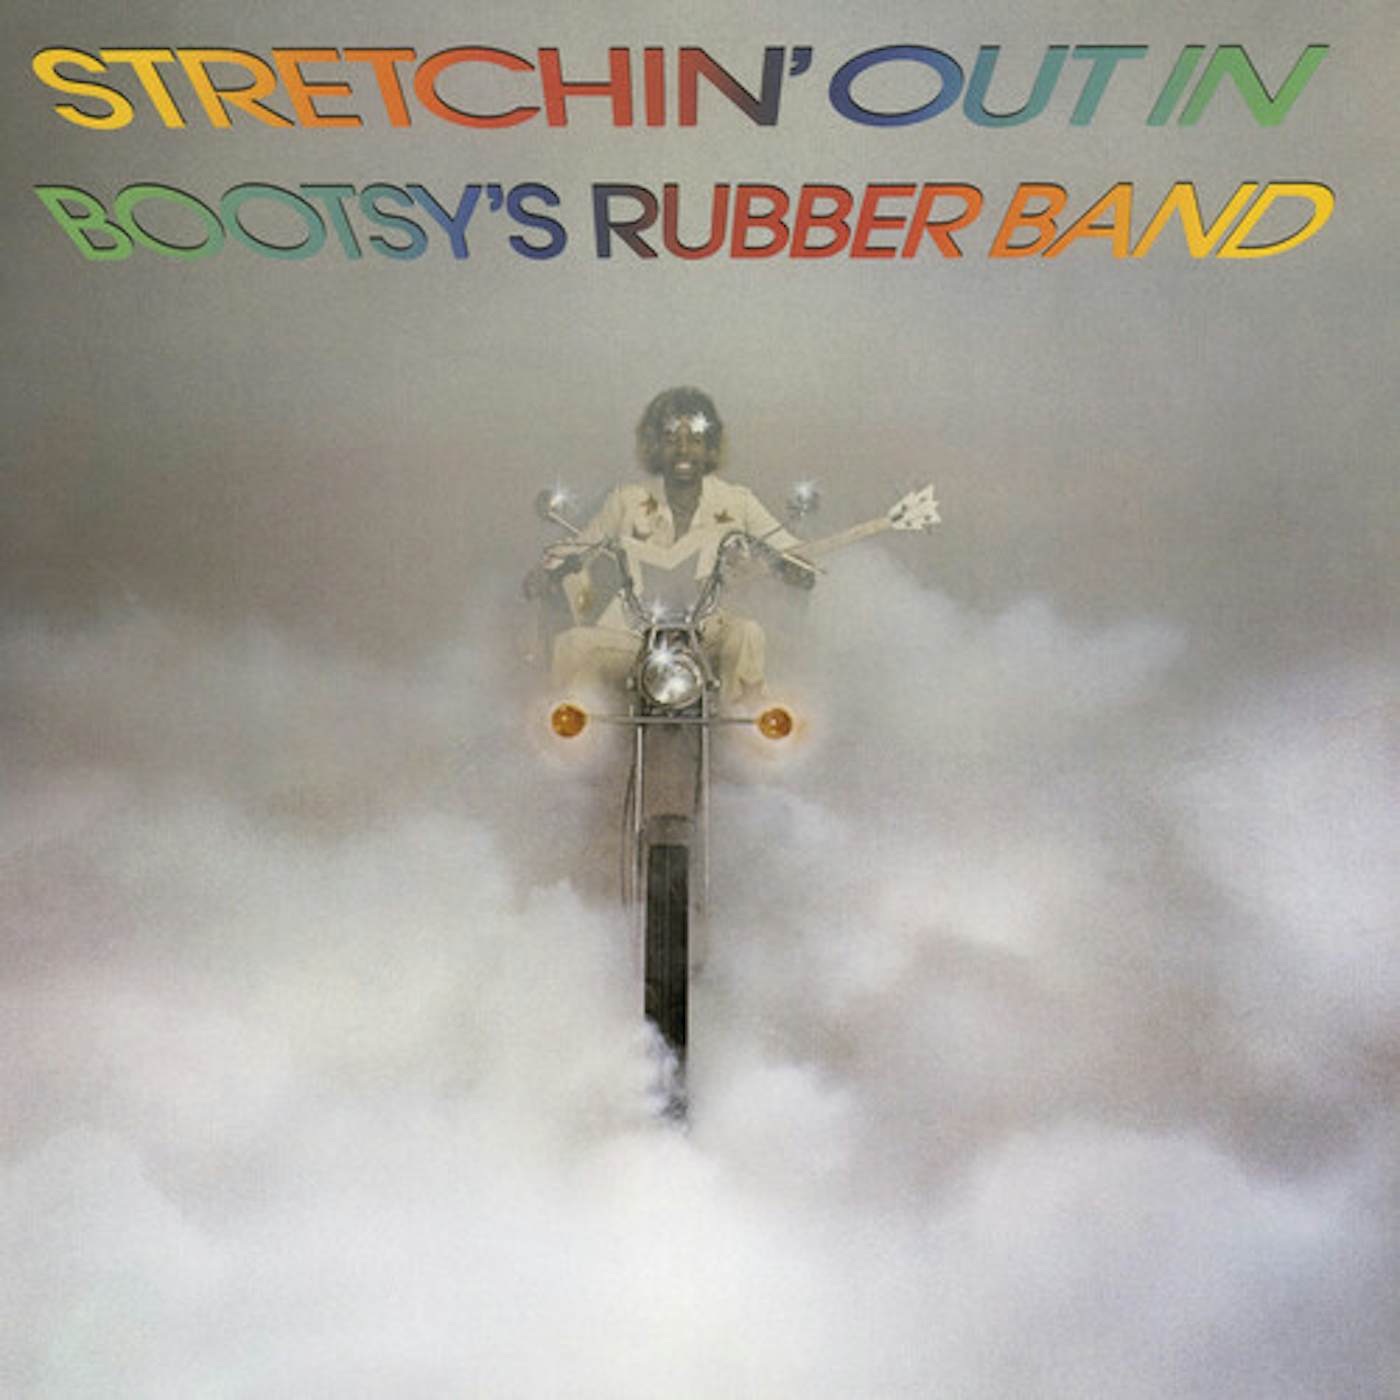 STRETCHIN OUT IN BOOTSY'S RUBBER BAND (IMPORT) CD